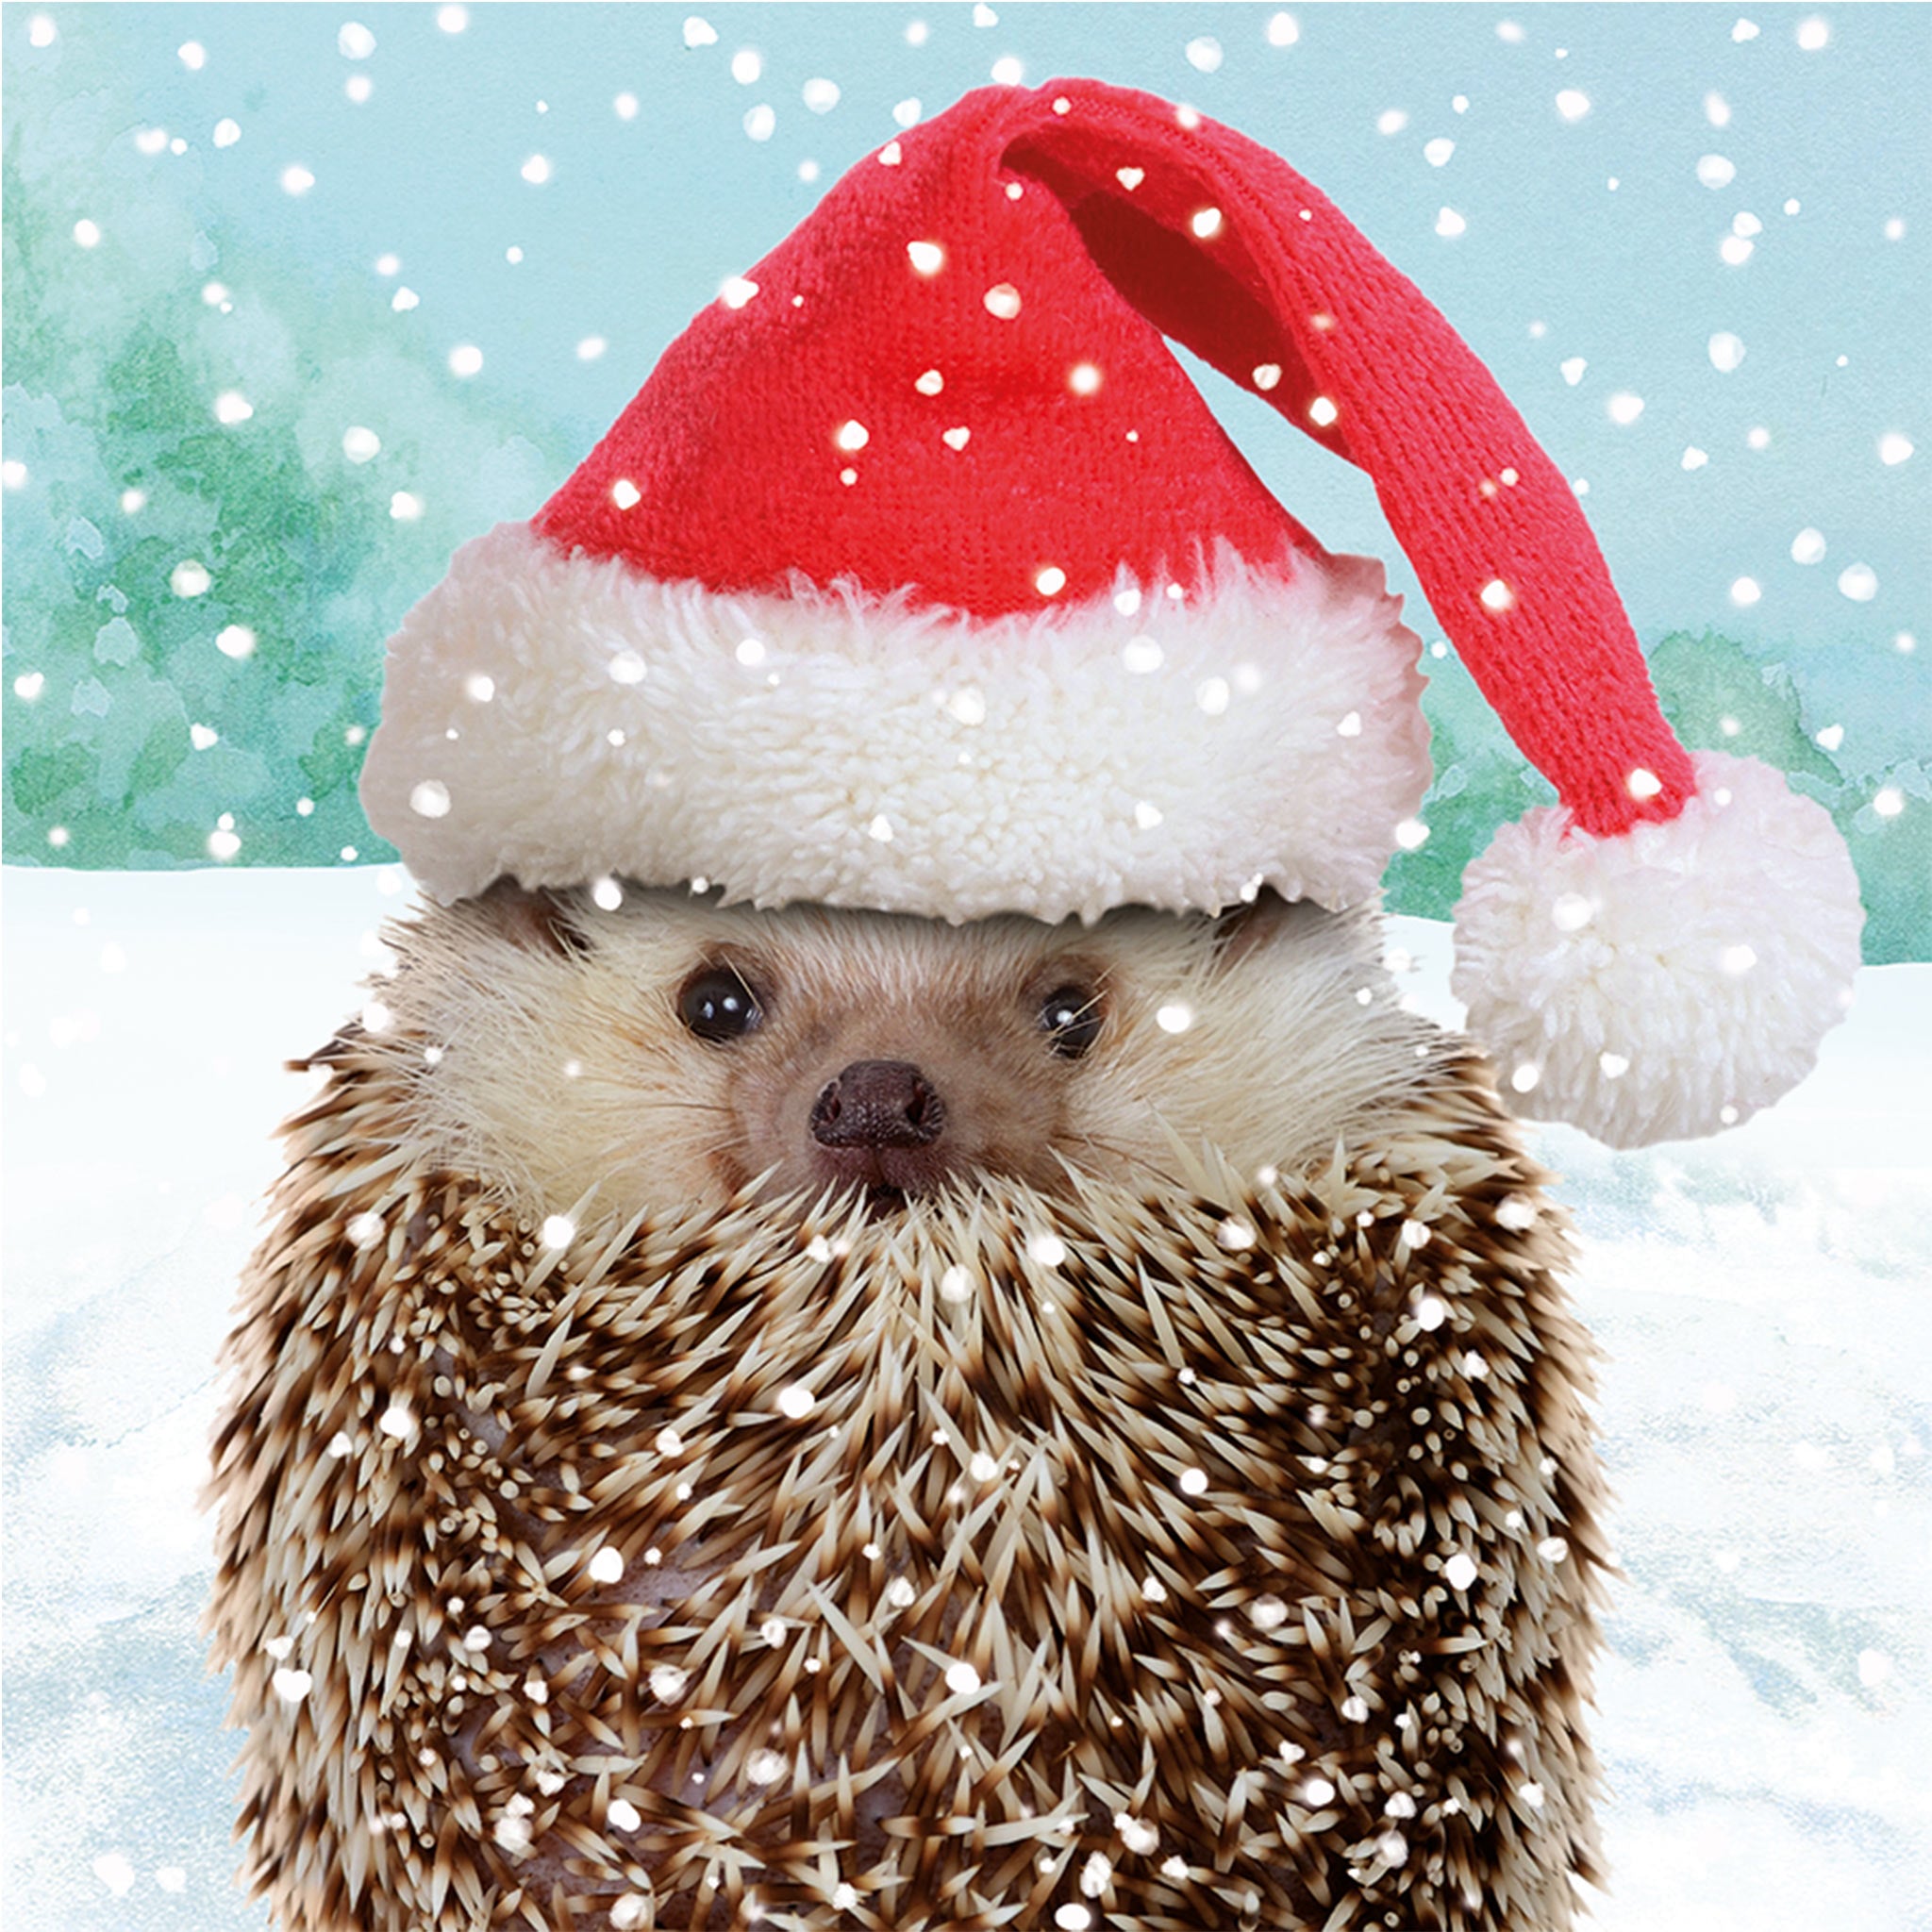 The design on this Christmas card is of a hedgehog, wearing a Father Christmas hat.